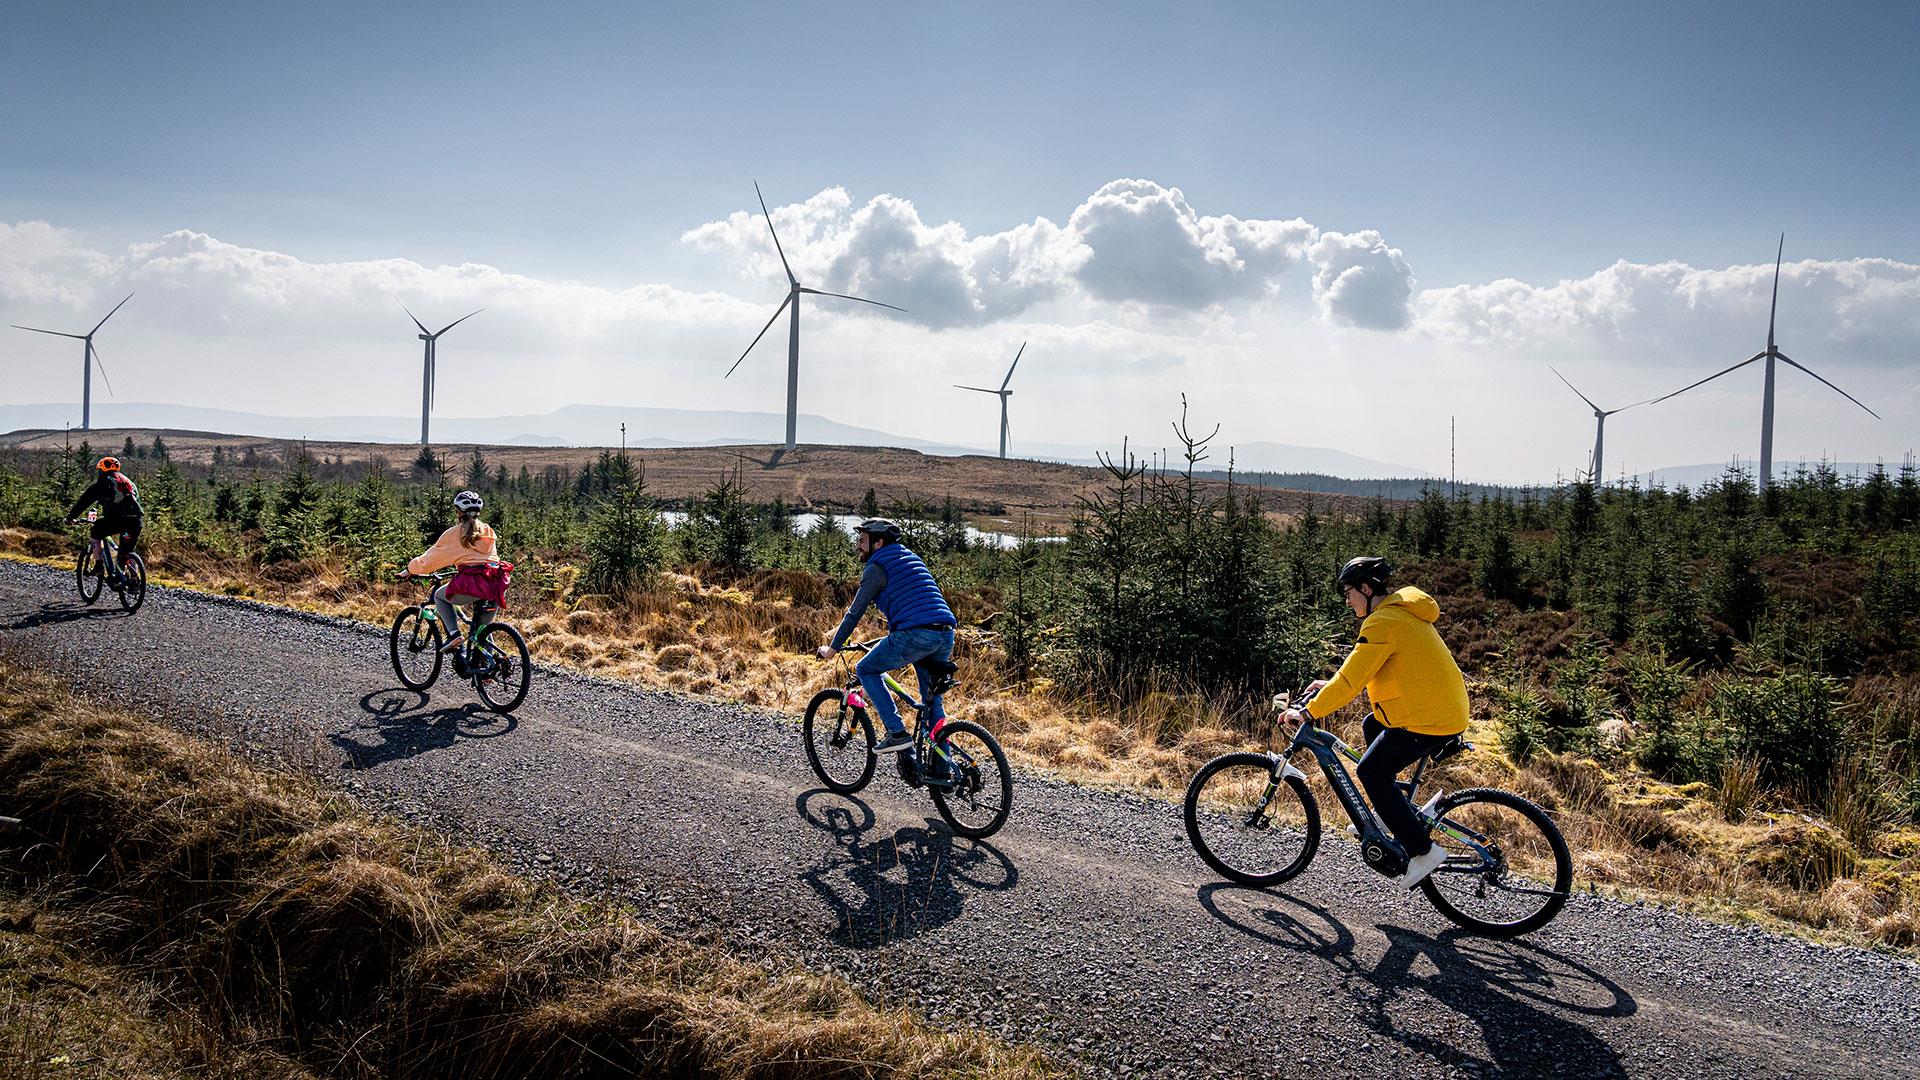 Group in single file on electric bikes on a trail with wind turbines in the background enjoying the Electric Escape experience with Corralea Adventure